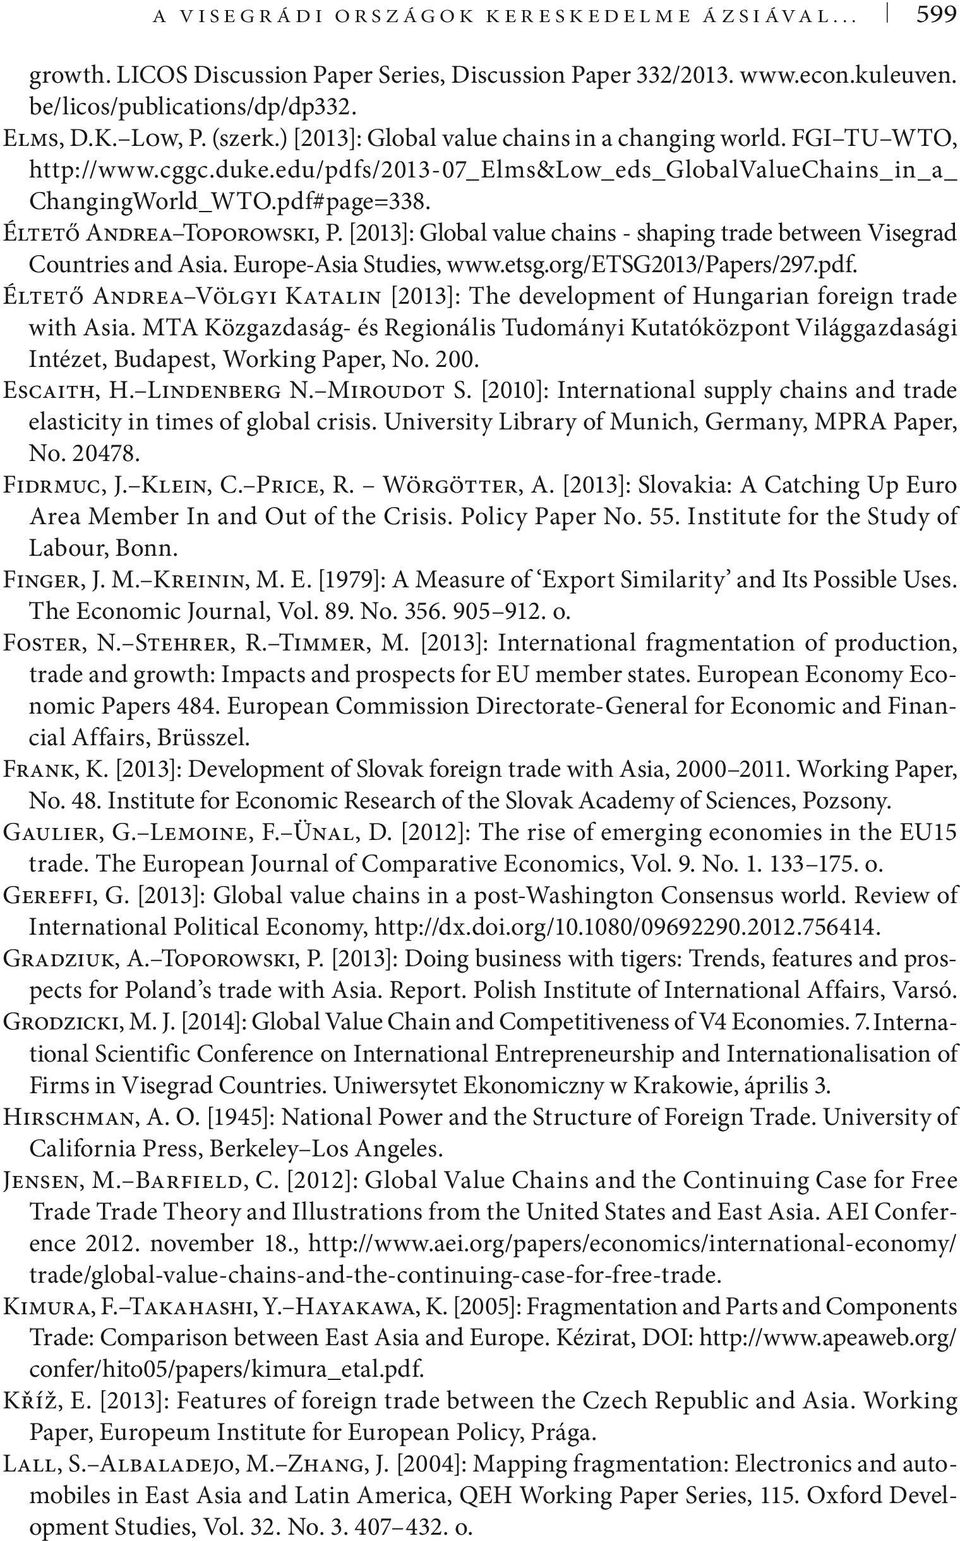 [2013]: Global value chains - shaping trade between Visegrad Countries and Asia. Europe-Asia Studies, www.etsg.org/etsg2013/papers/297.pdf.